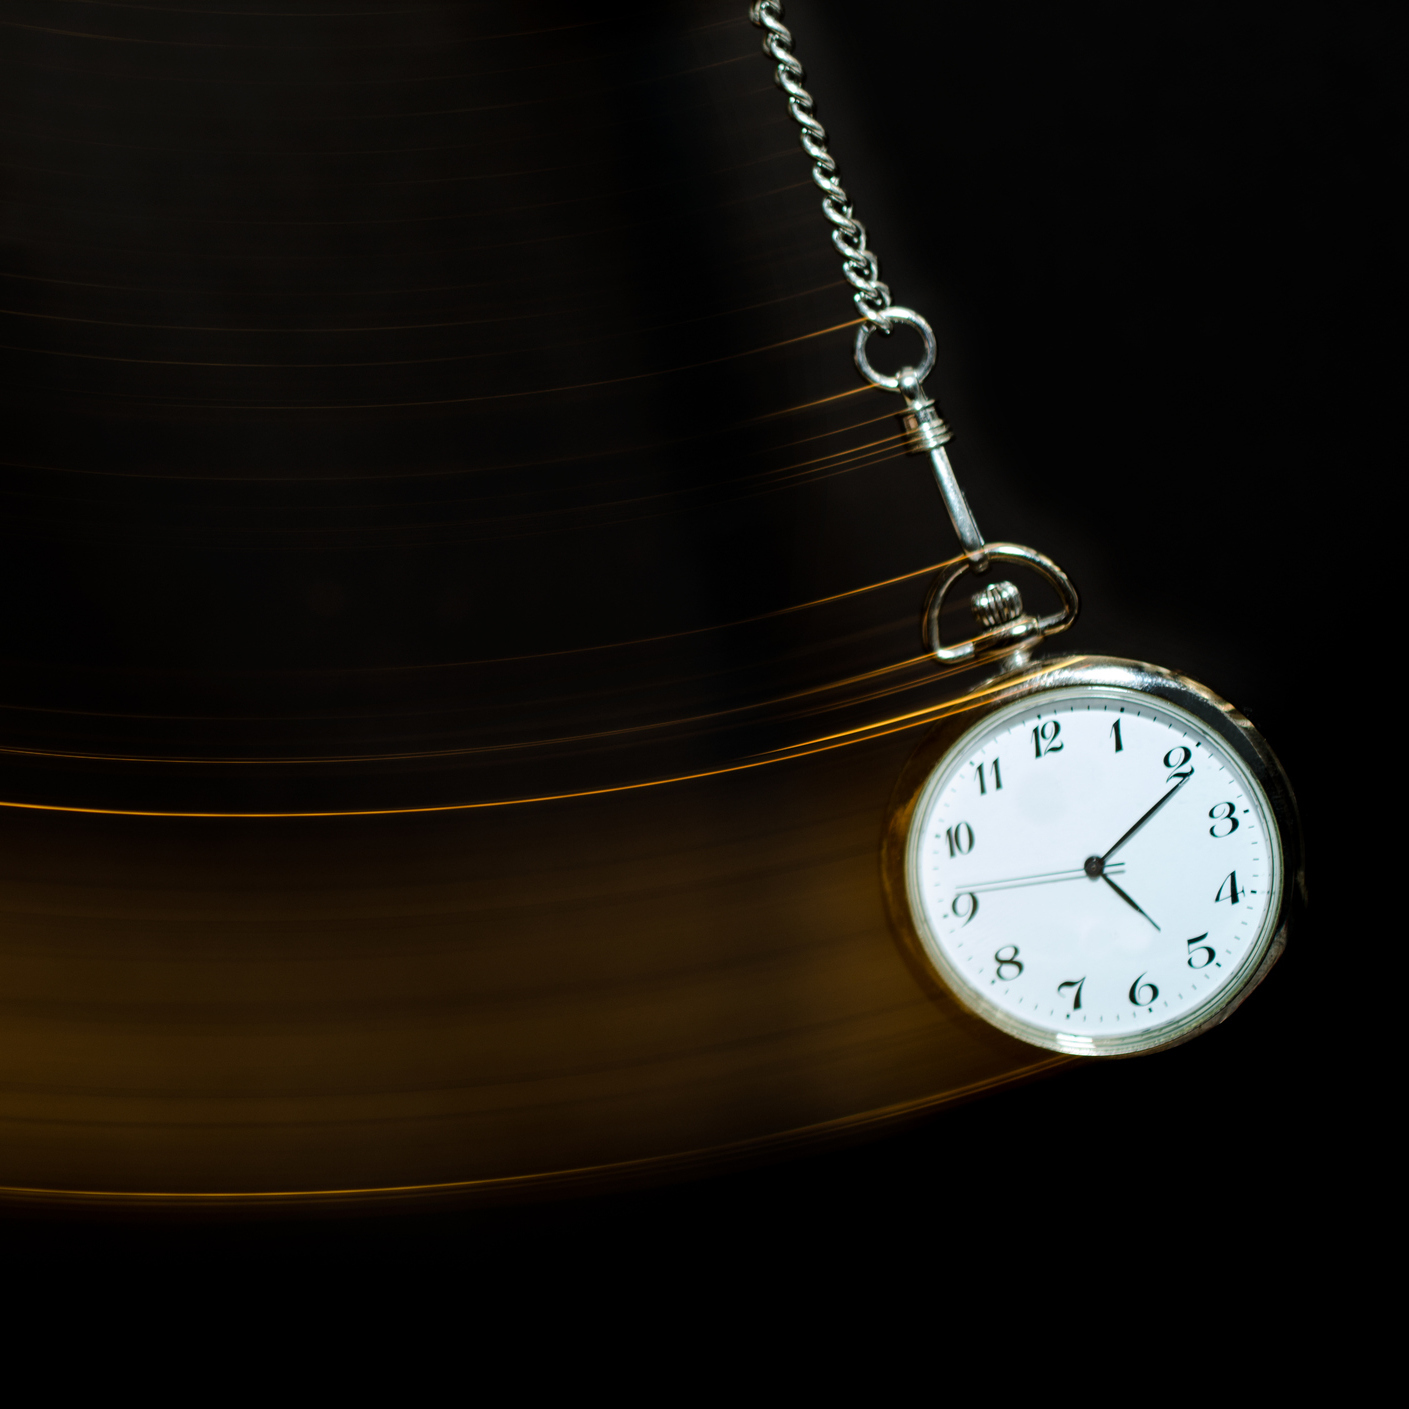 A pocket watch swinging in the air.